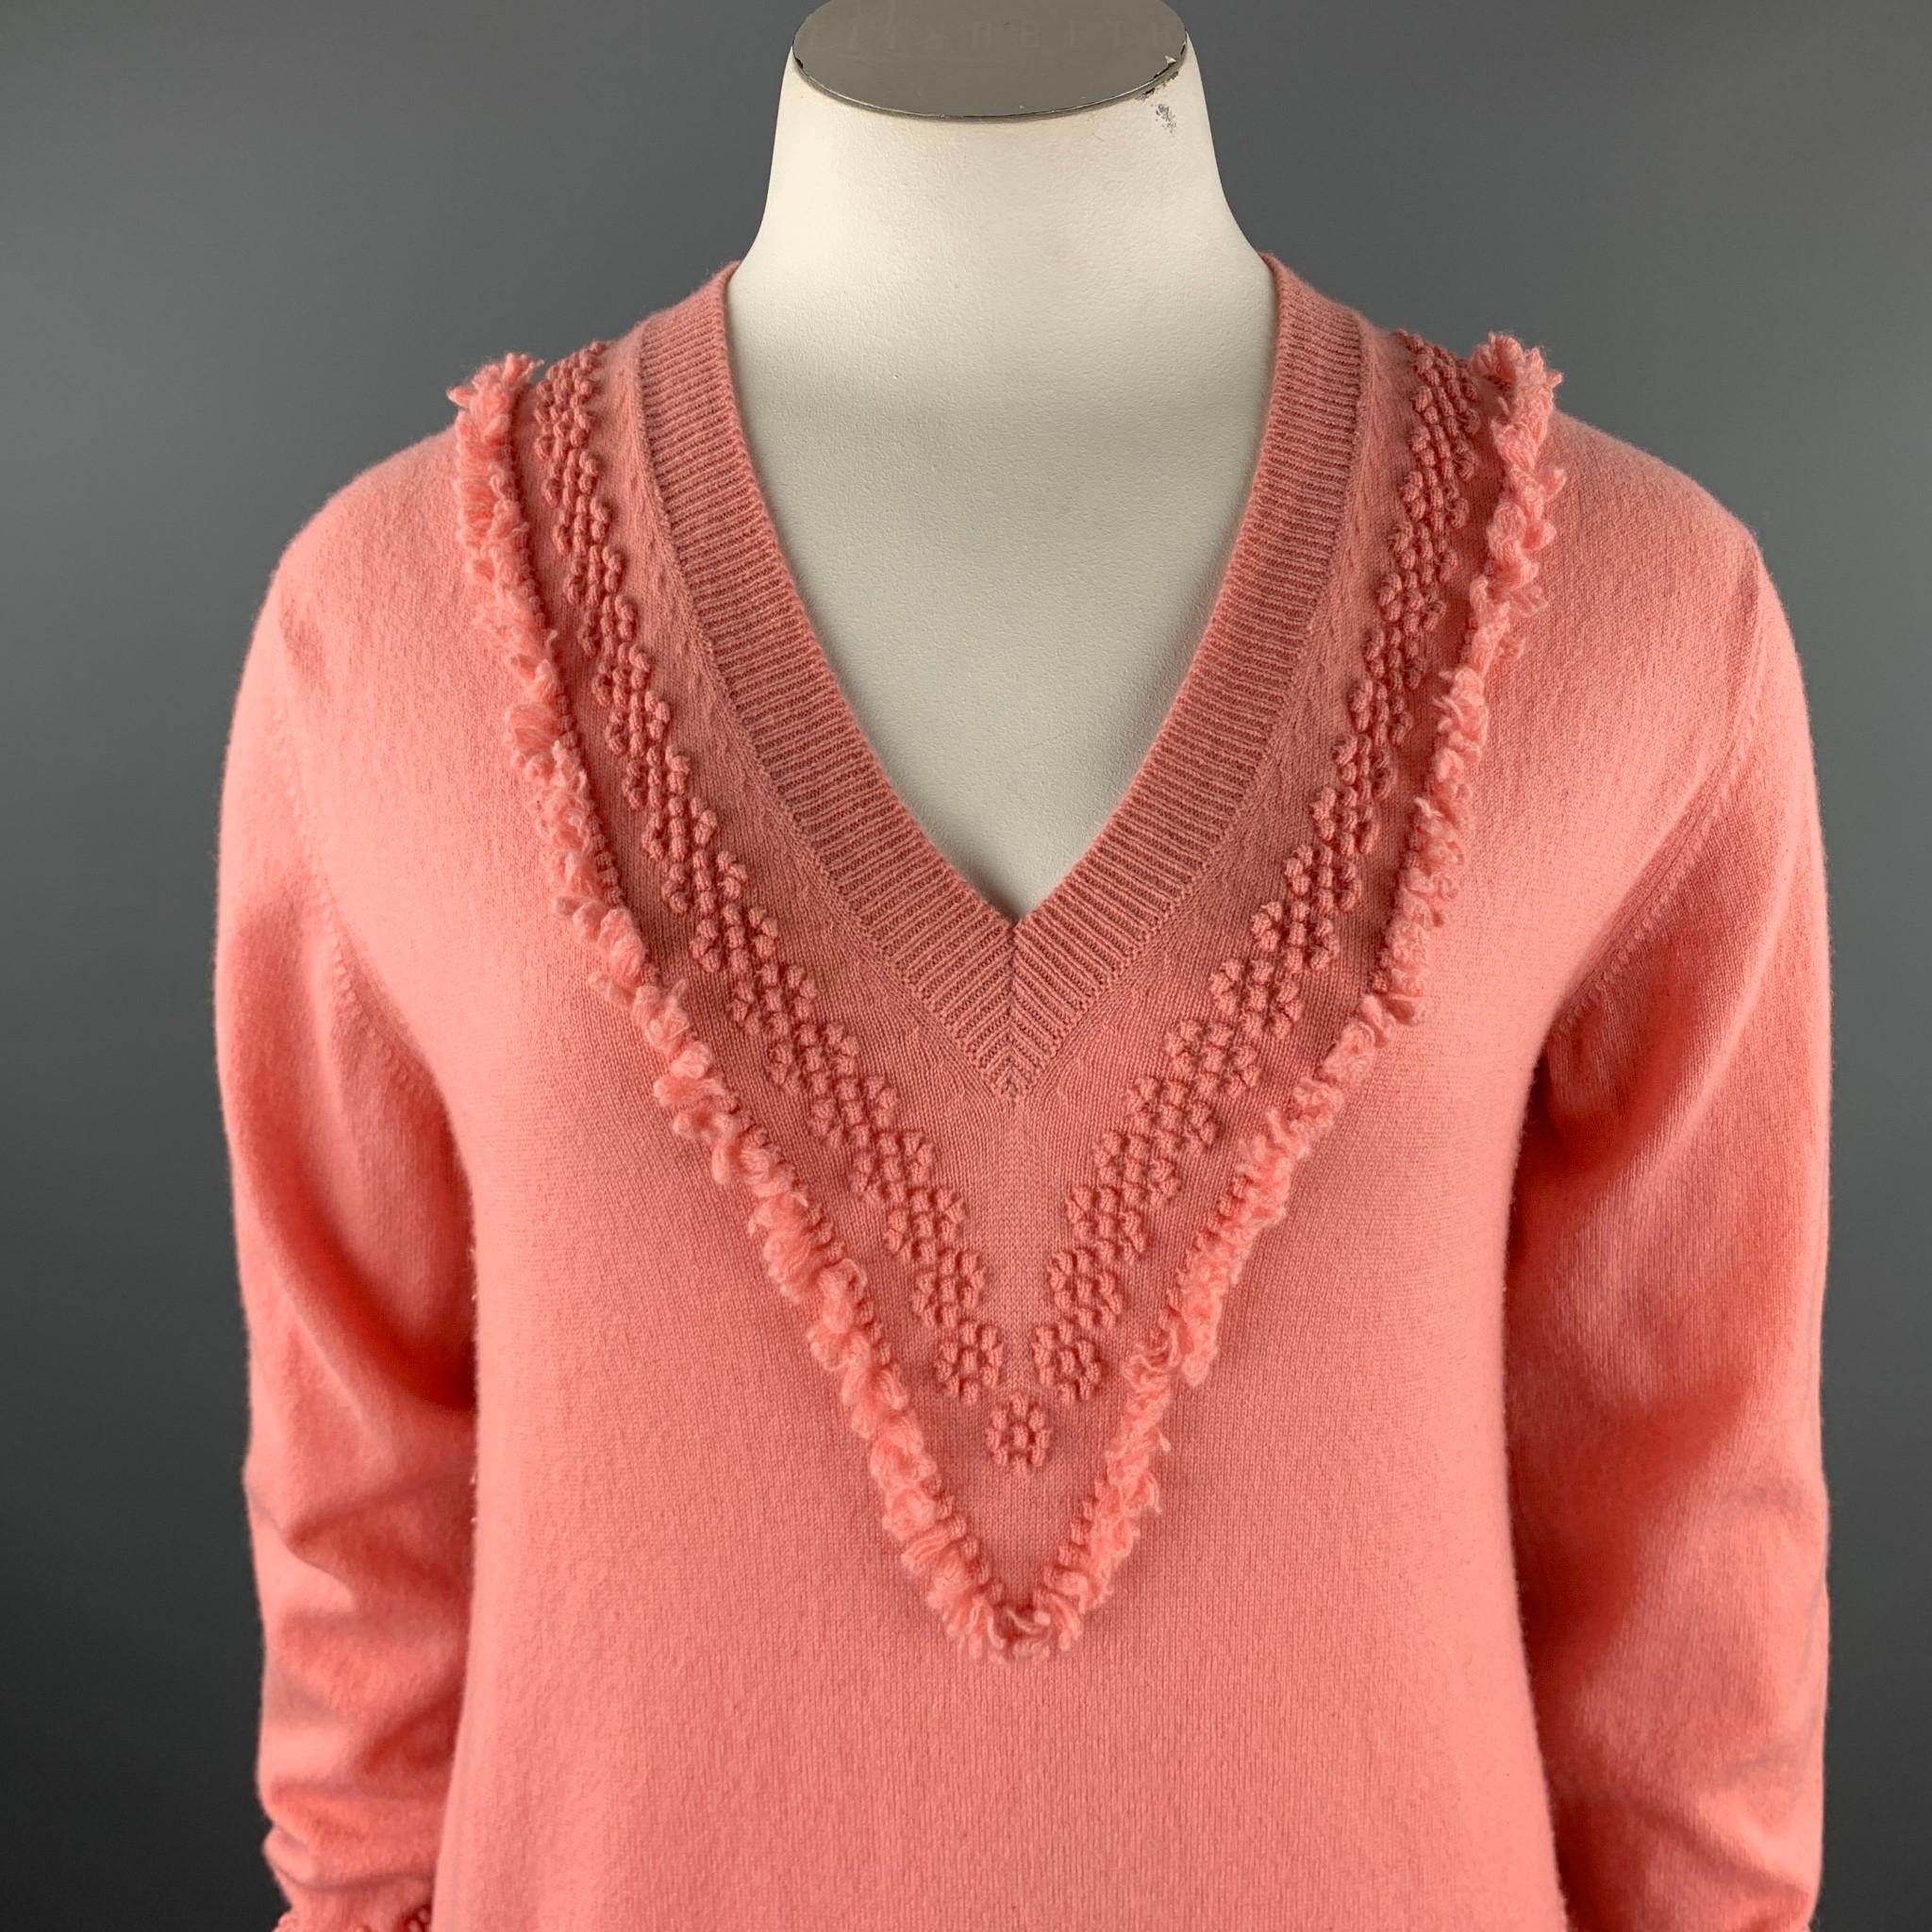 BARRIE sweater comes in a salmon pink knitted cashmere with fringe details featuring long sleeves and a v-neck. Made in Scotland.

Very Good Pre-Owned Condition.
Marked: XL
Original Retail Price: $975.00

Measurements:

Shoulder: 18 in.
Bust: 42